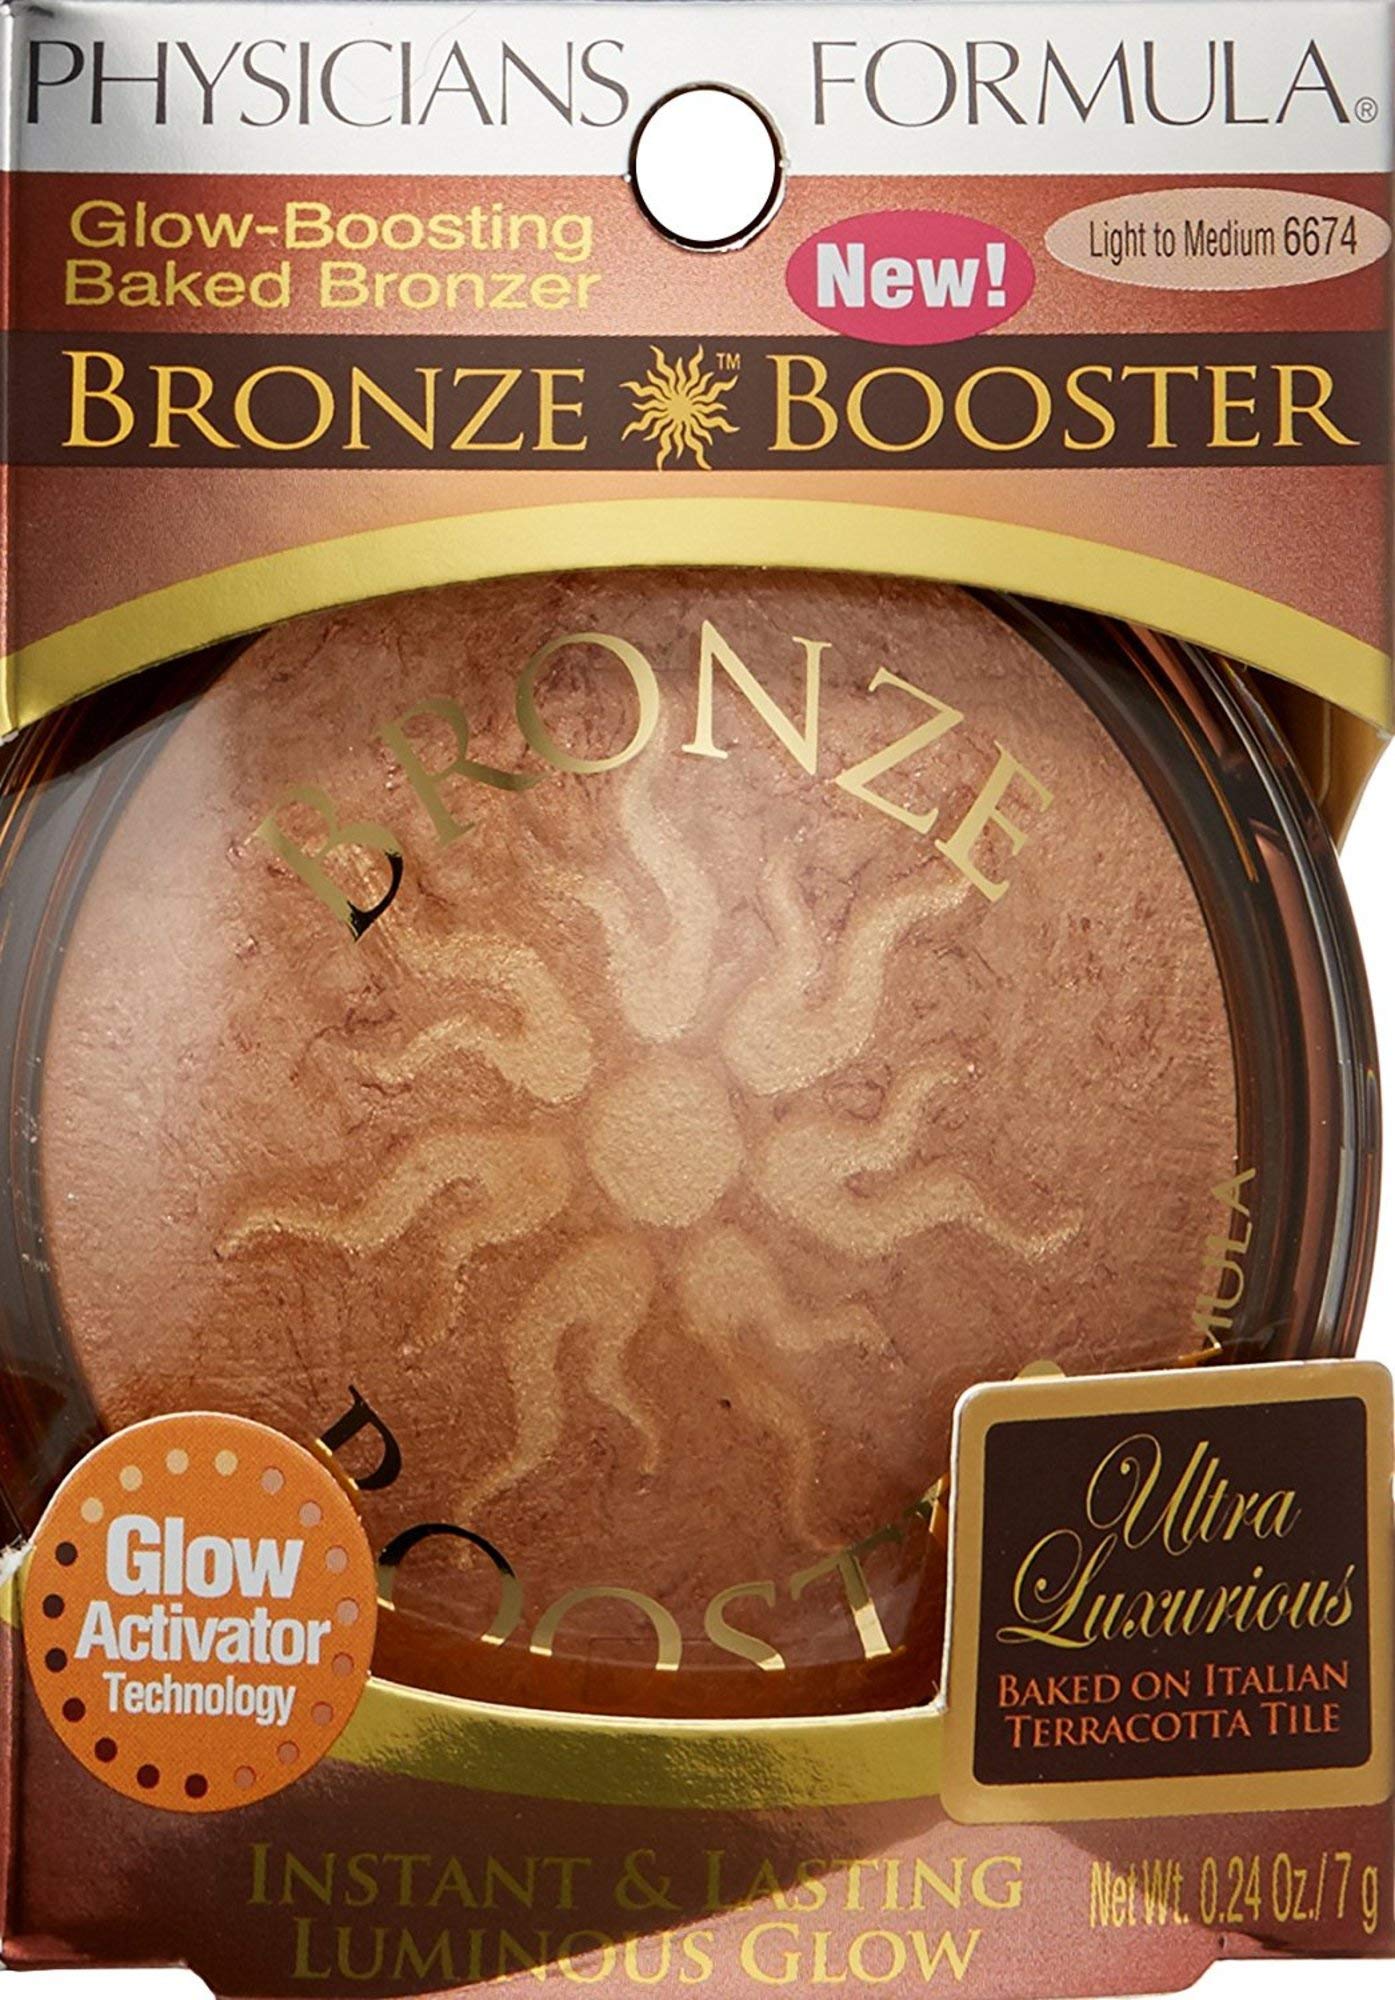 Physicians Formula Bronze Booster Glow & Mood Baked Tan Boosting Bronzer Light to Medium, Dermatologist Tested